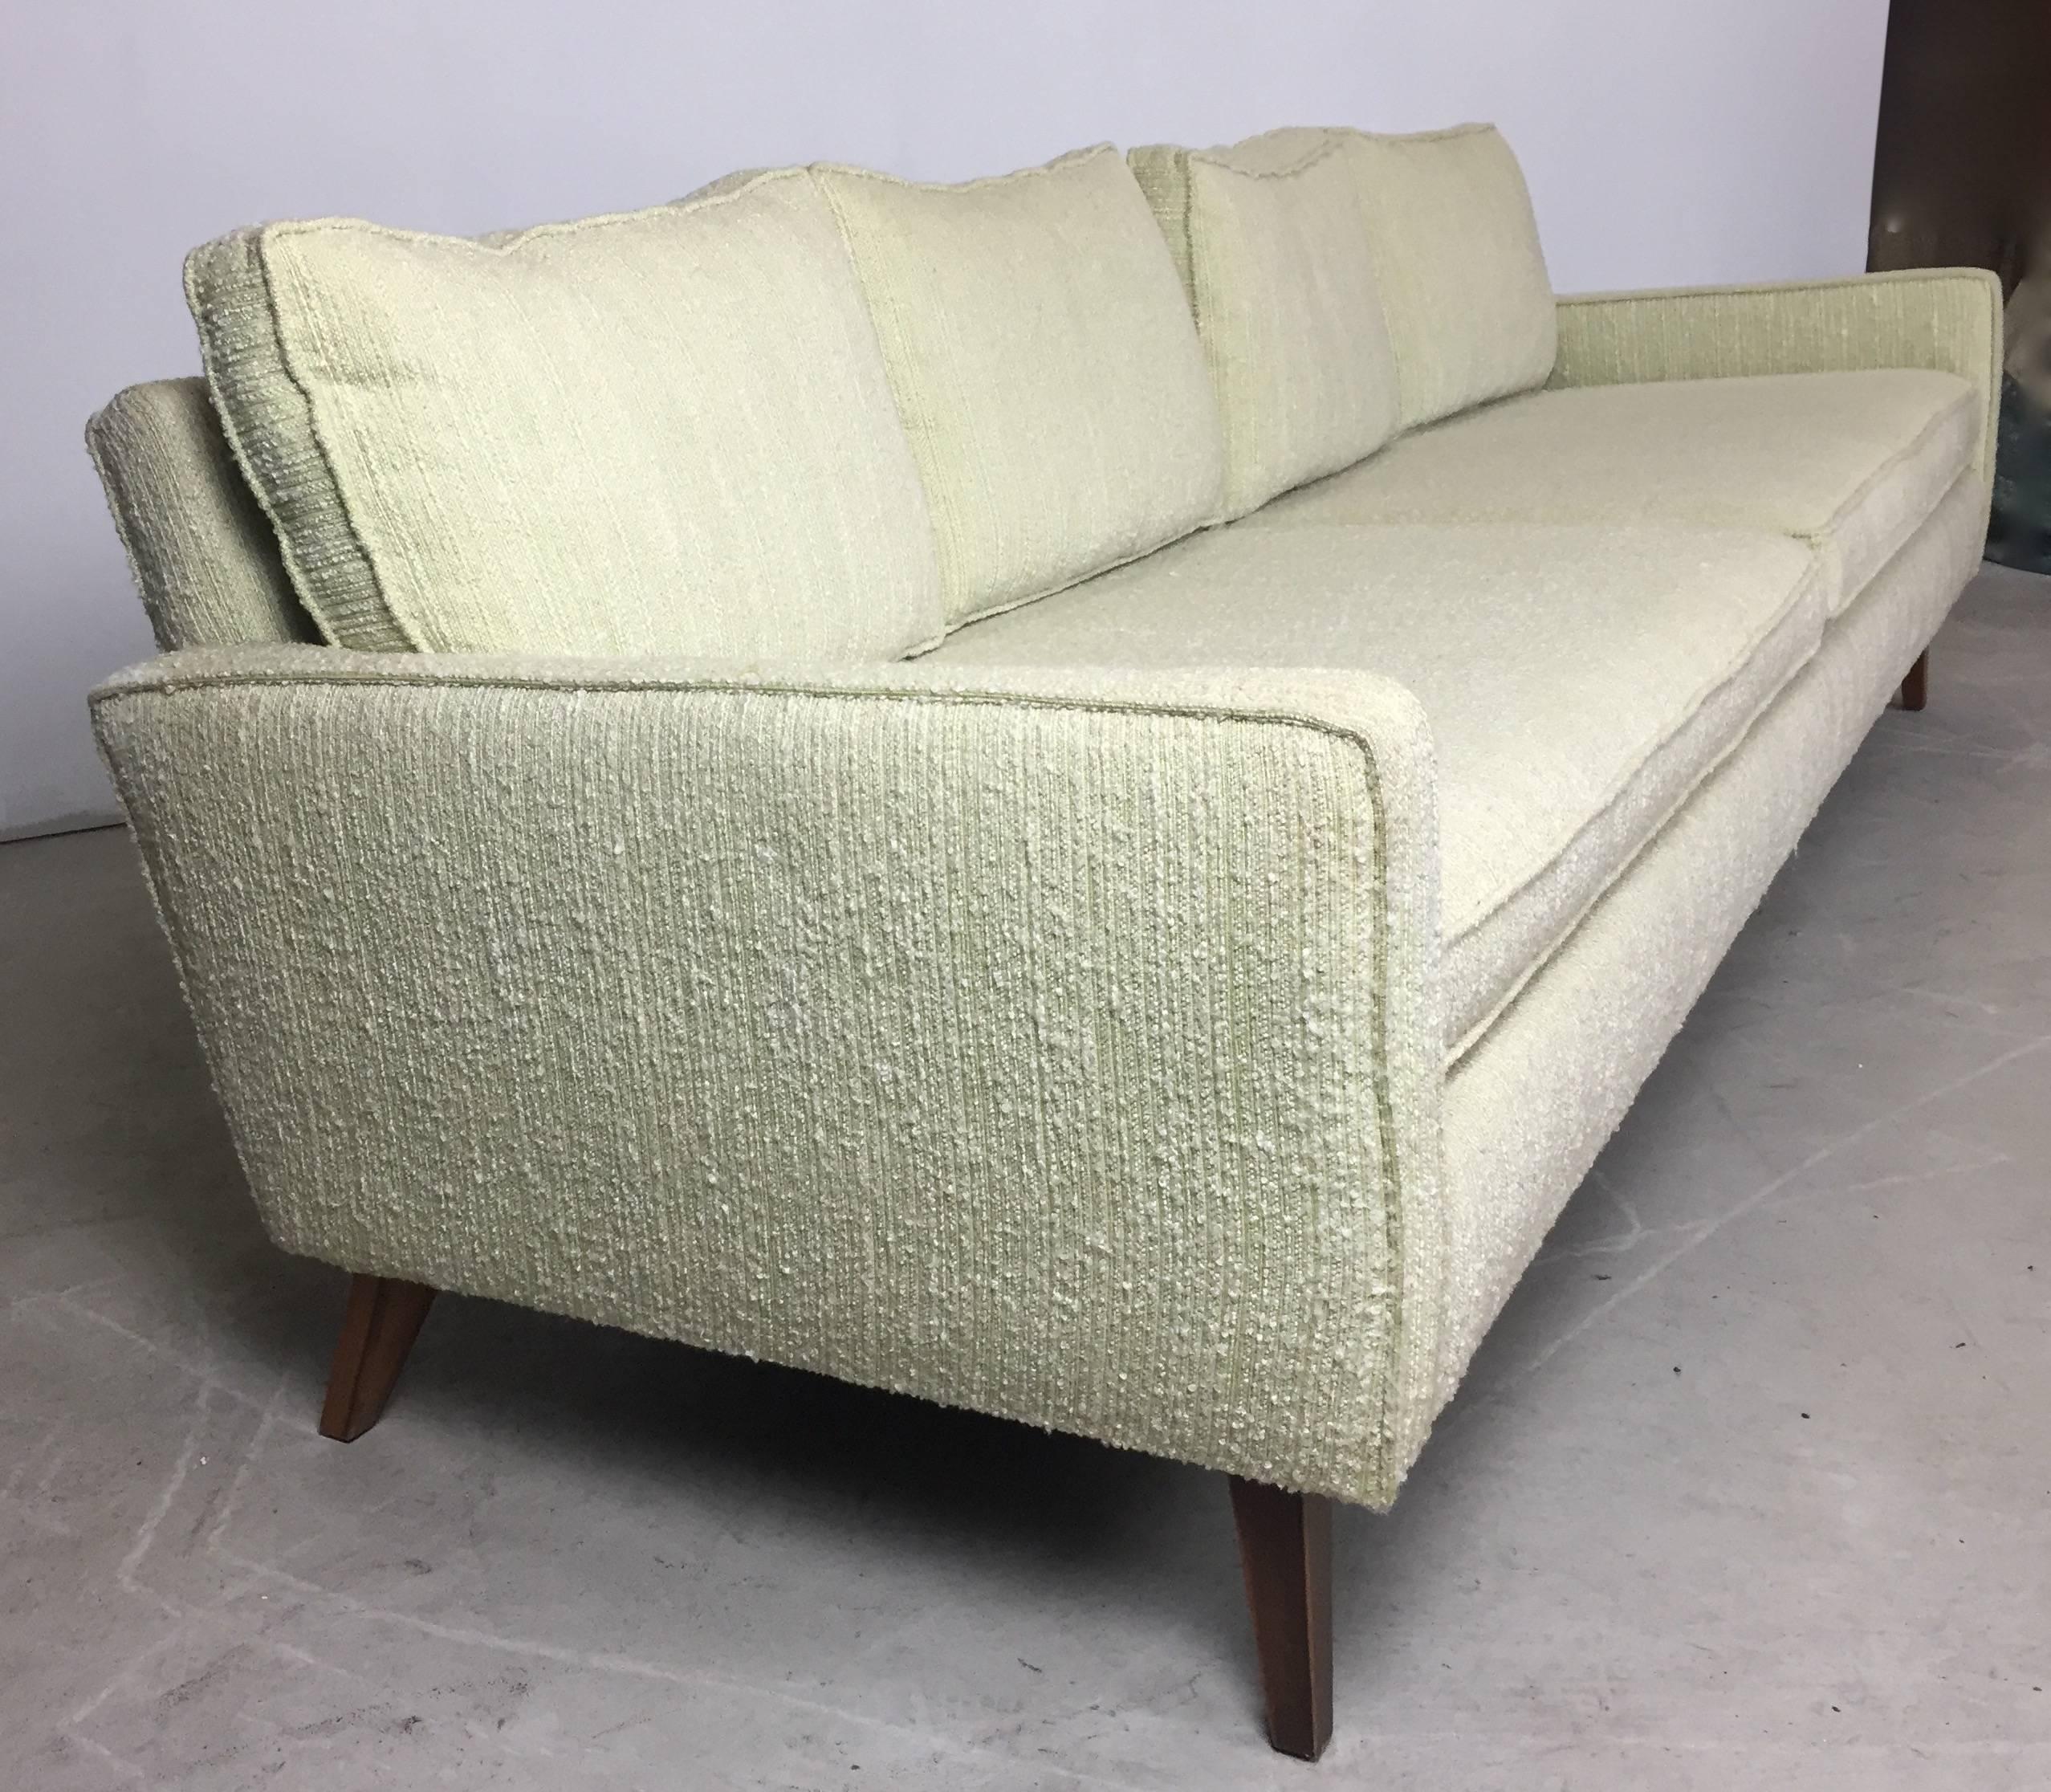 Beautiful 1950s celery wool boucle and walnut sofa and chair set in excellent original condition.

The sofa measures 92